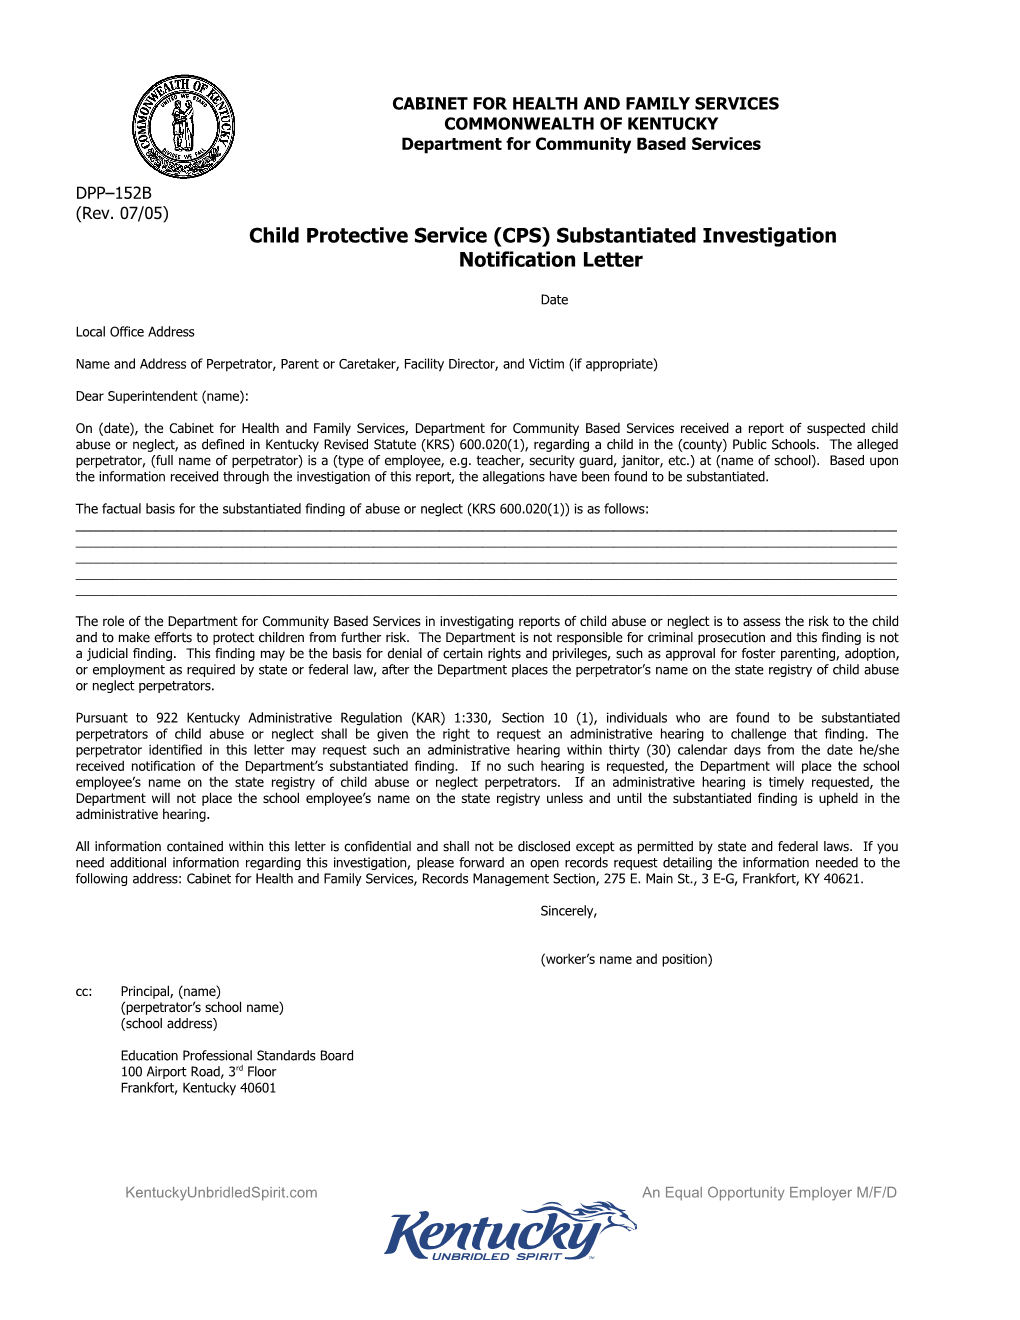 Child Protective Service Substantiated Investigation Notification Letter